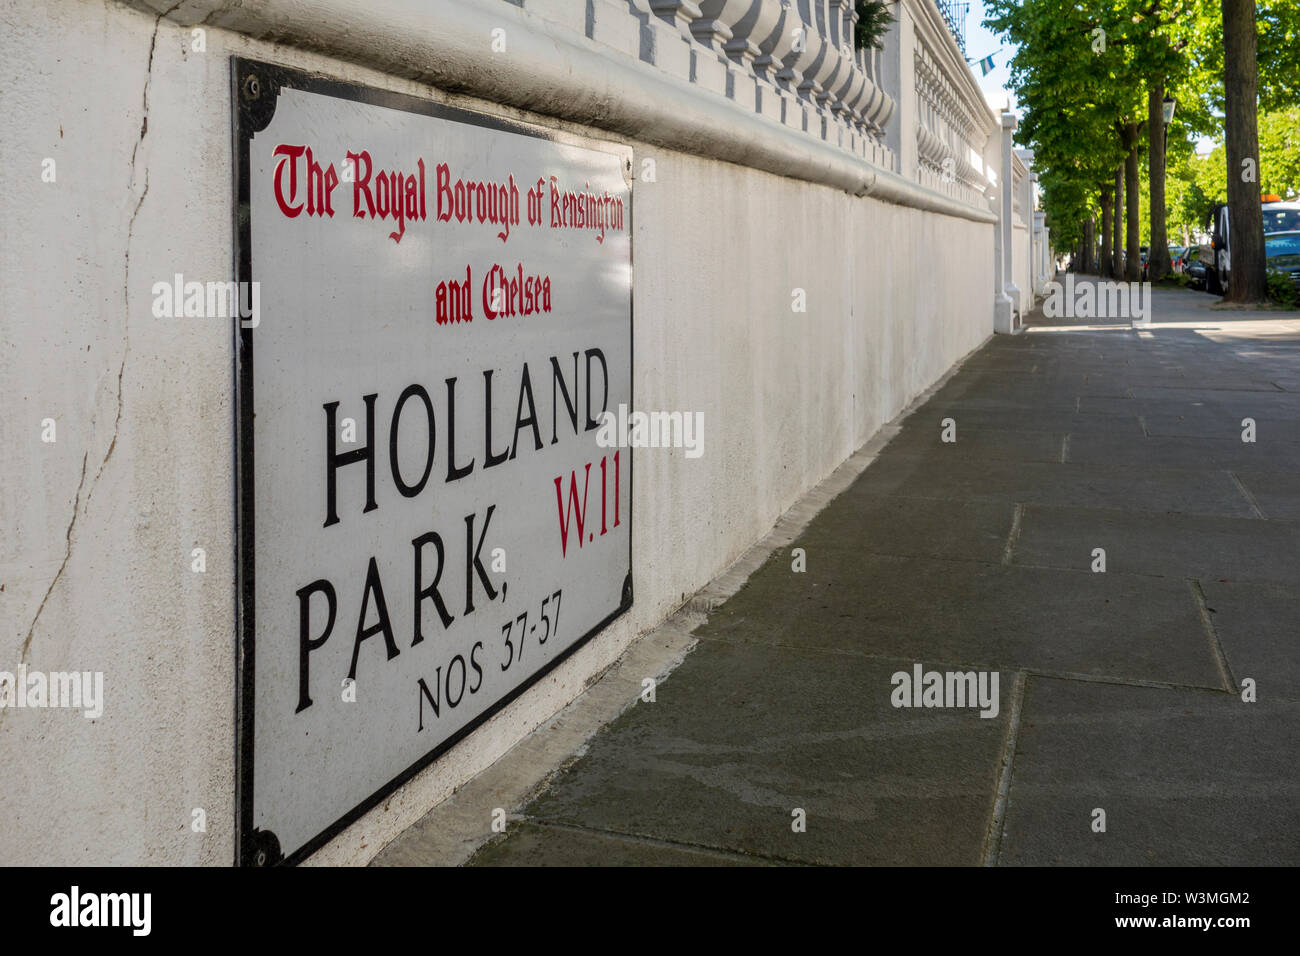 Street name road sign for Holland Park, The  Royal Borough of Kensington and Chelsea, W11, London, UK Stock Photo